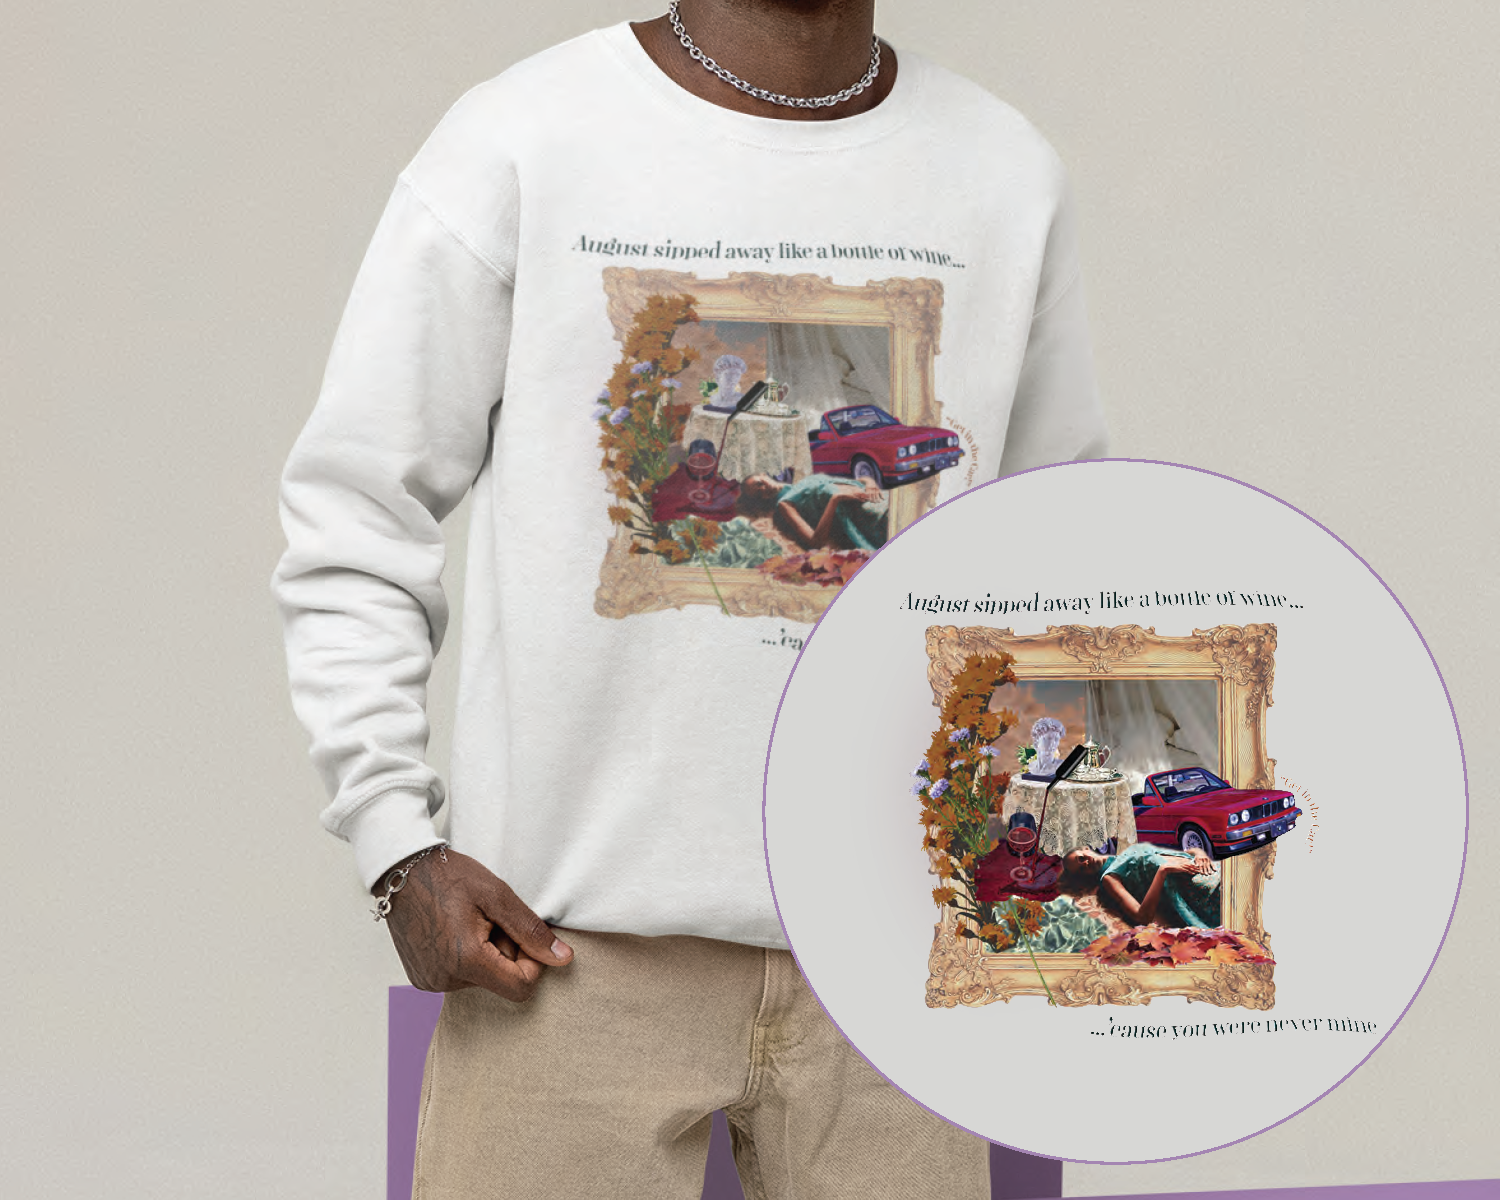 The August Sipped Away Crewneck #2